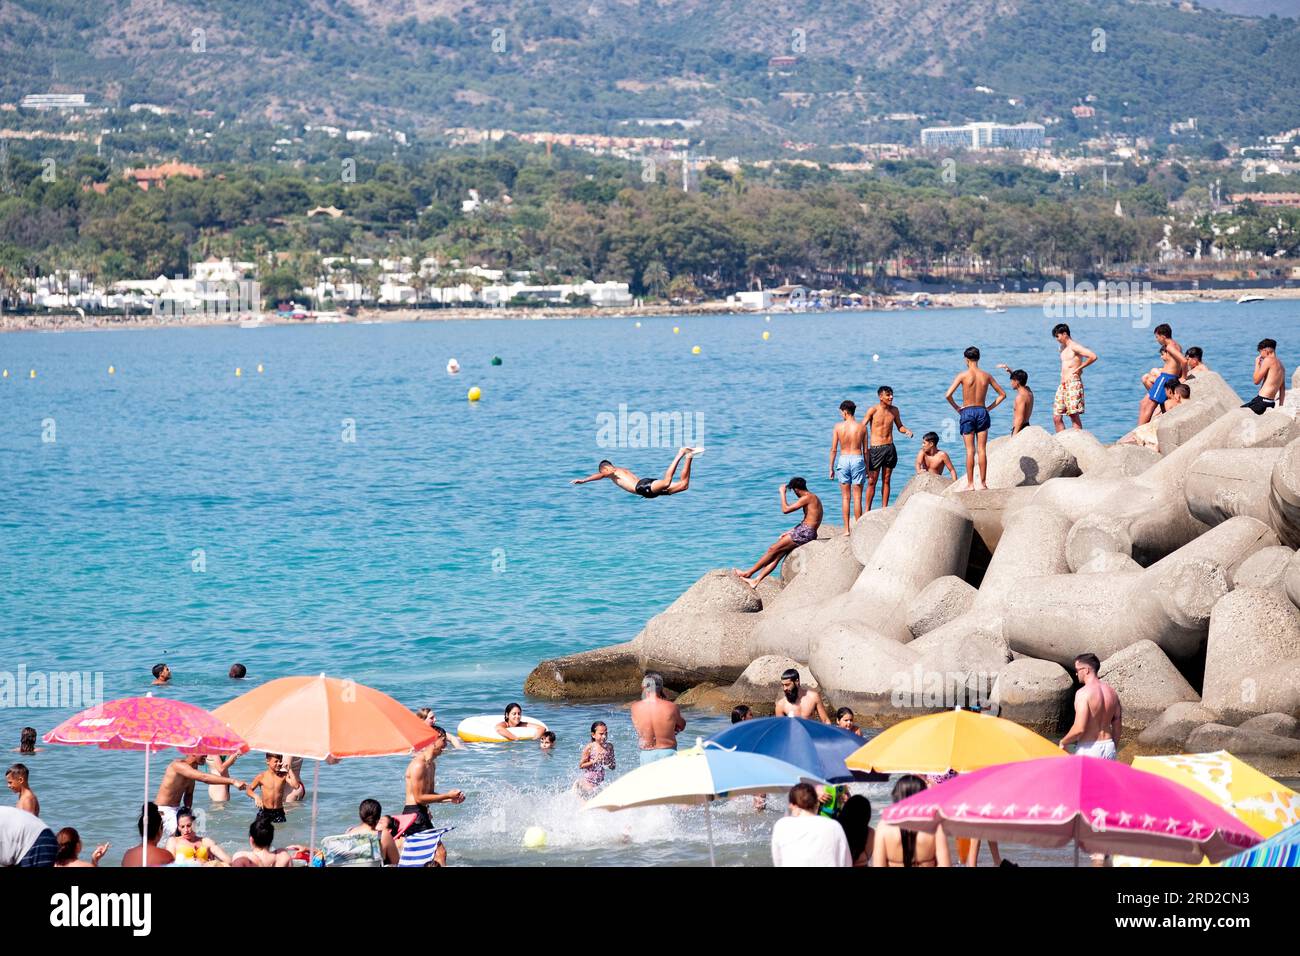 A youth dives into the sea from nearby rocks to cool down on a hot summer day. Others line up to follow him into the sea. Marbella, Spain Stock Photo